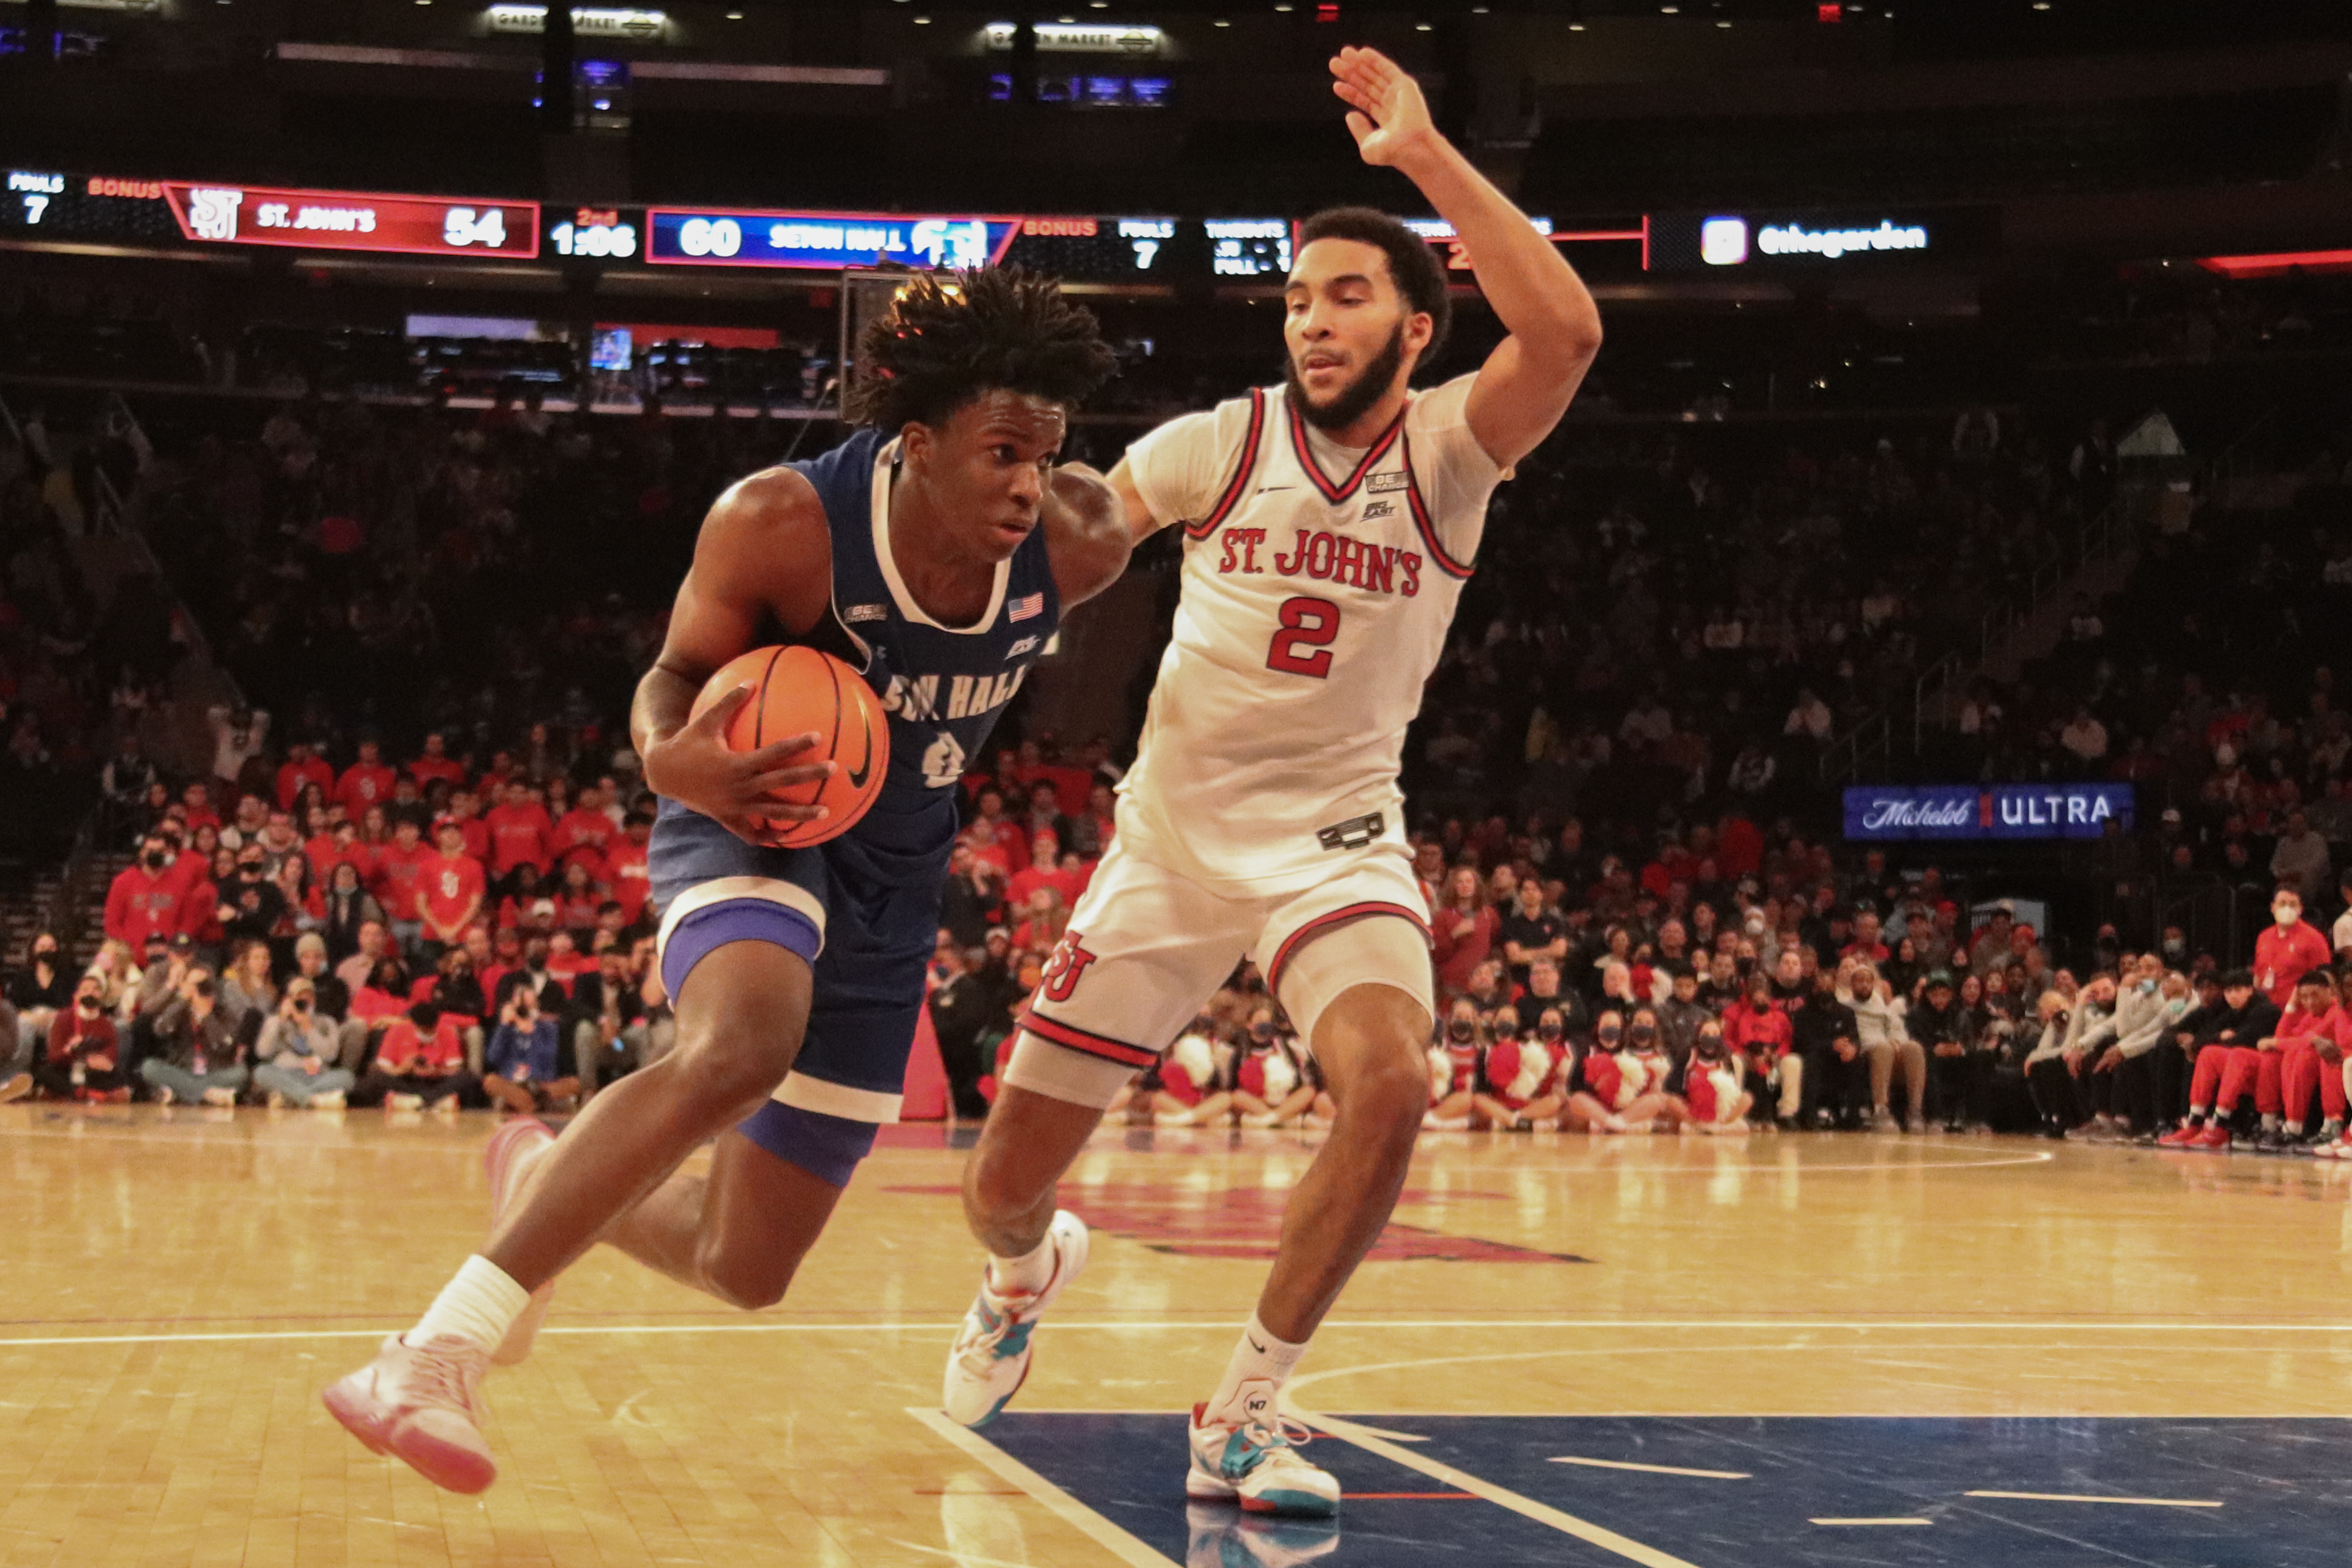 Seton Hall's Kadary Richmond looks to drive to the basket during an away game at MSG vs. St. John's.